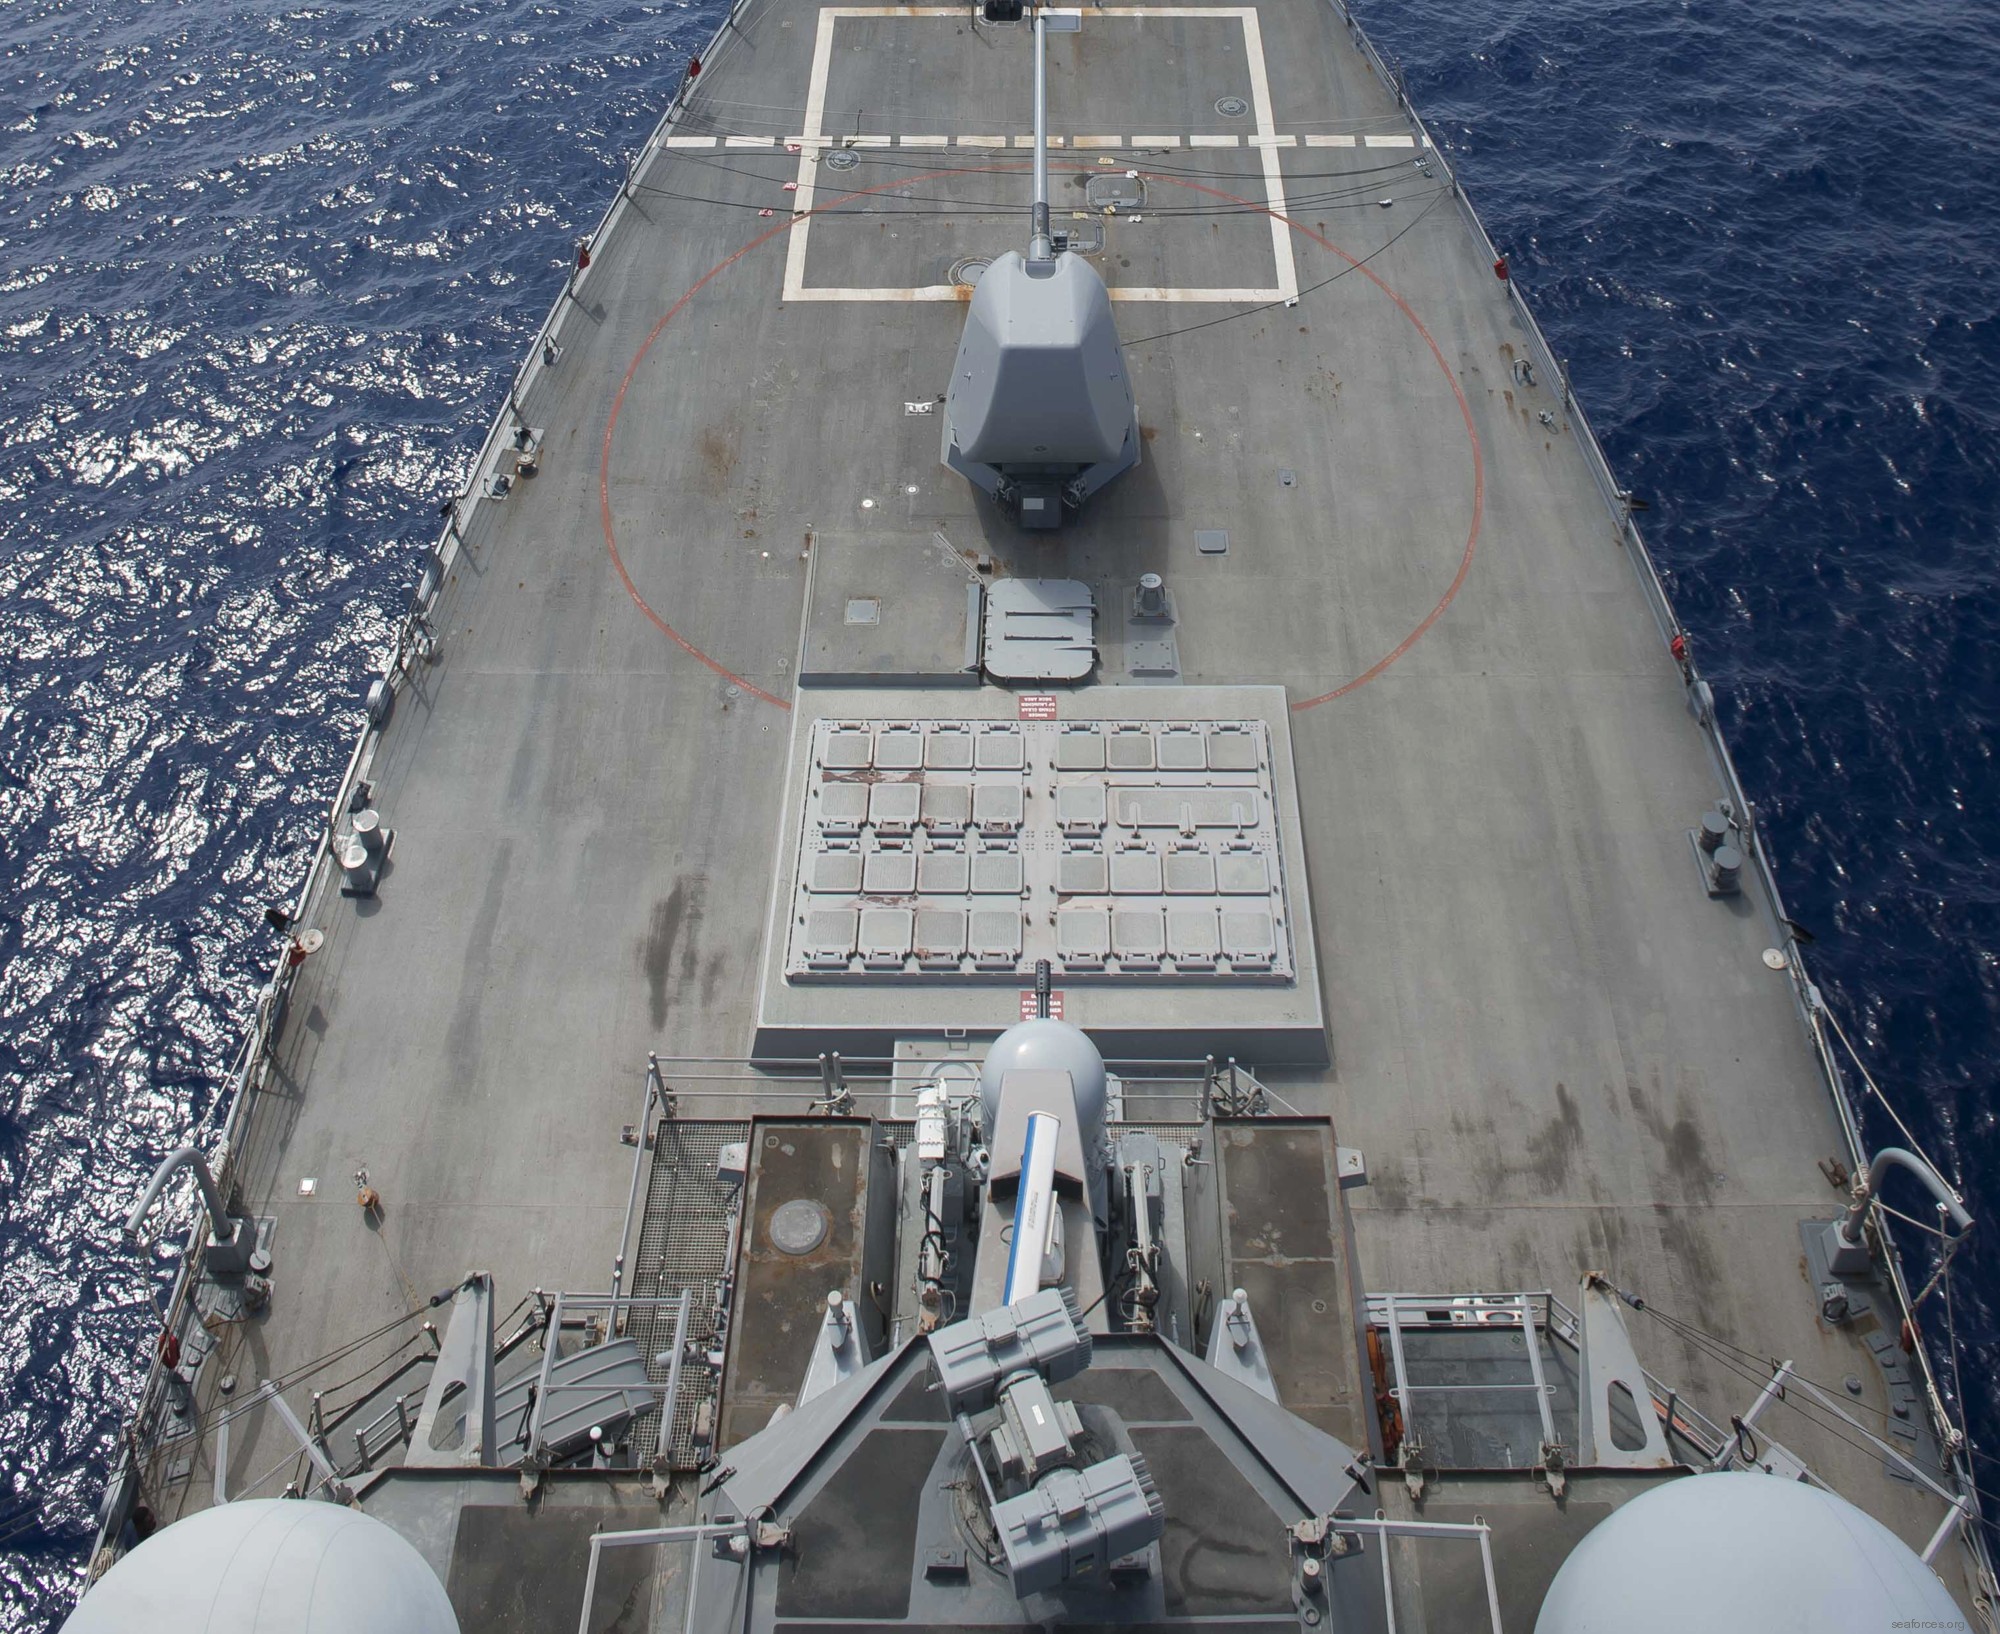 ddg-71 uss ross guided missile destroyer arleigh burke class aegis bmd 31 mk-41 vertical launching system vls